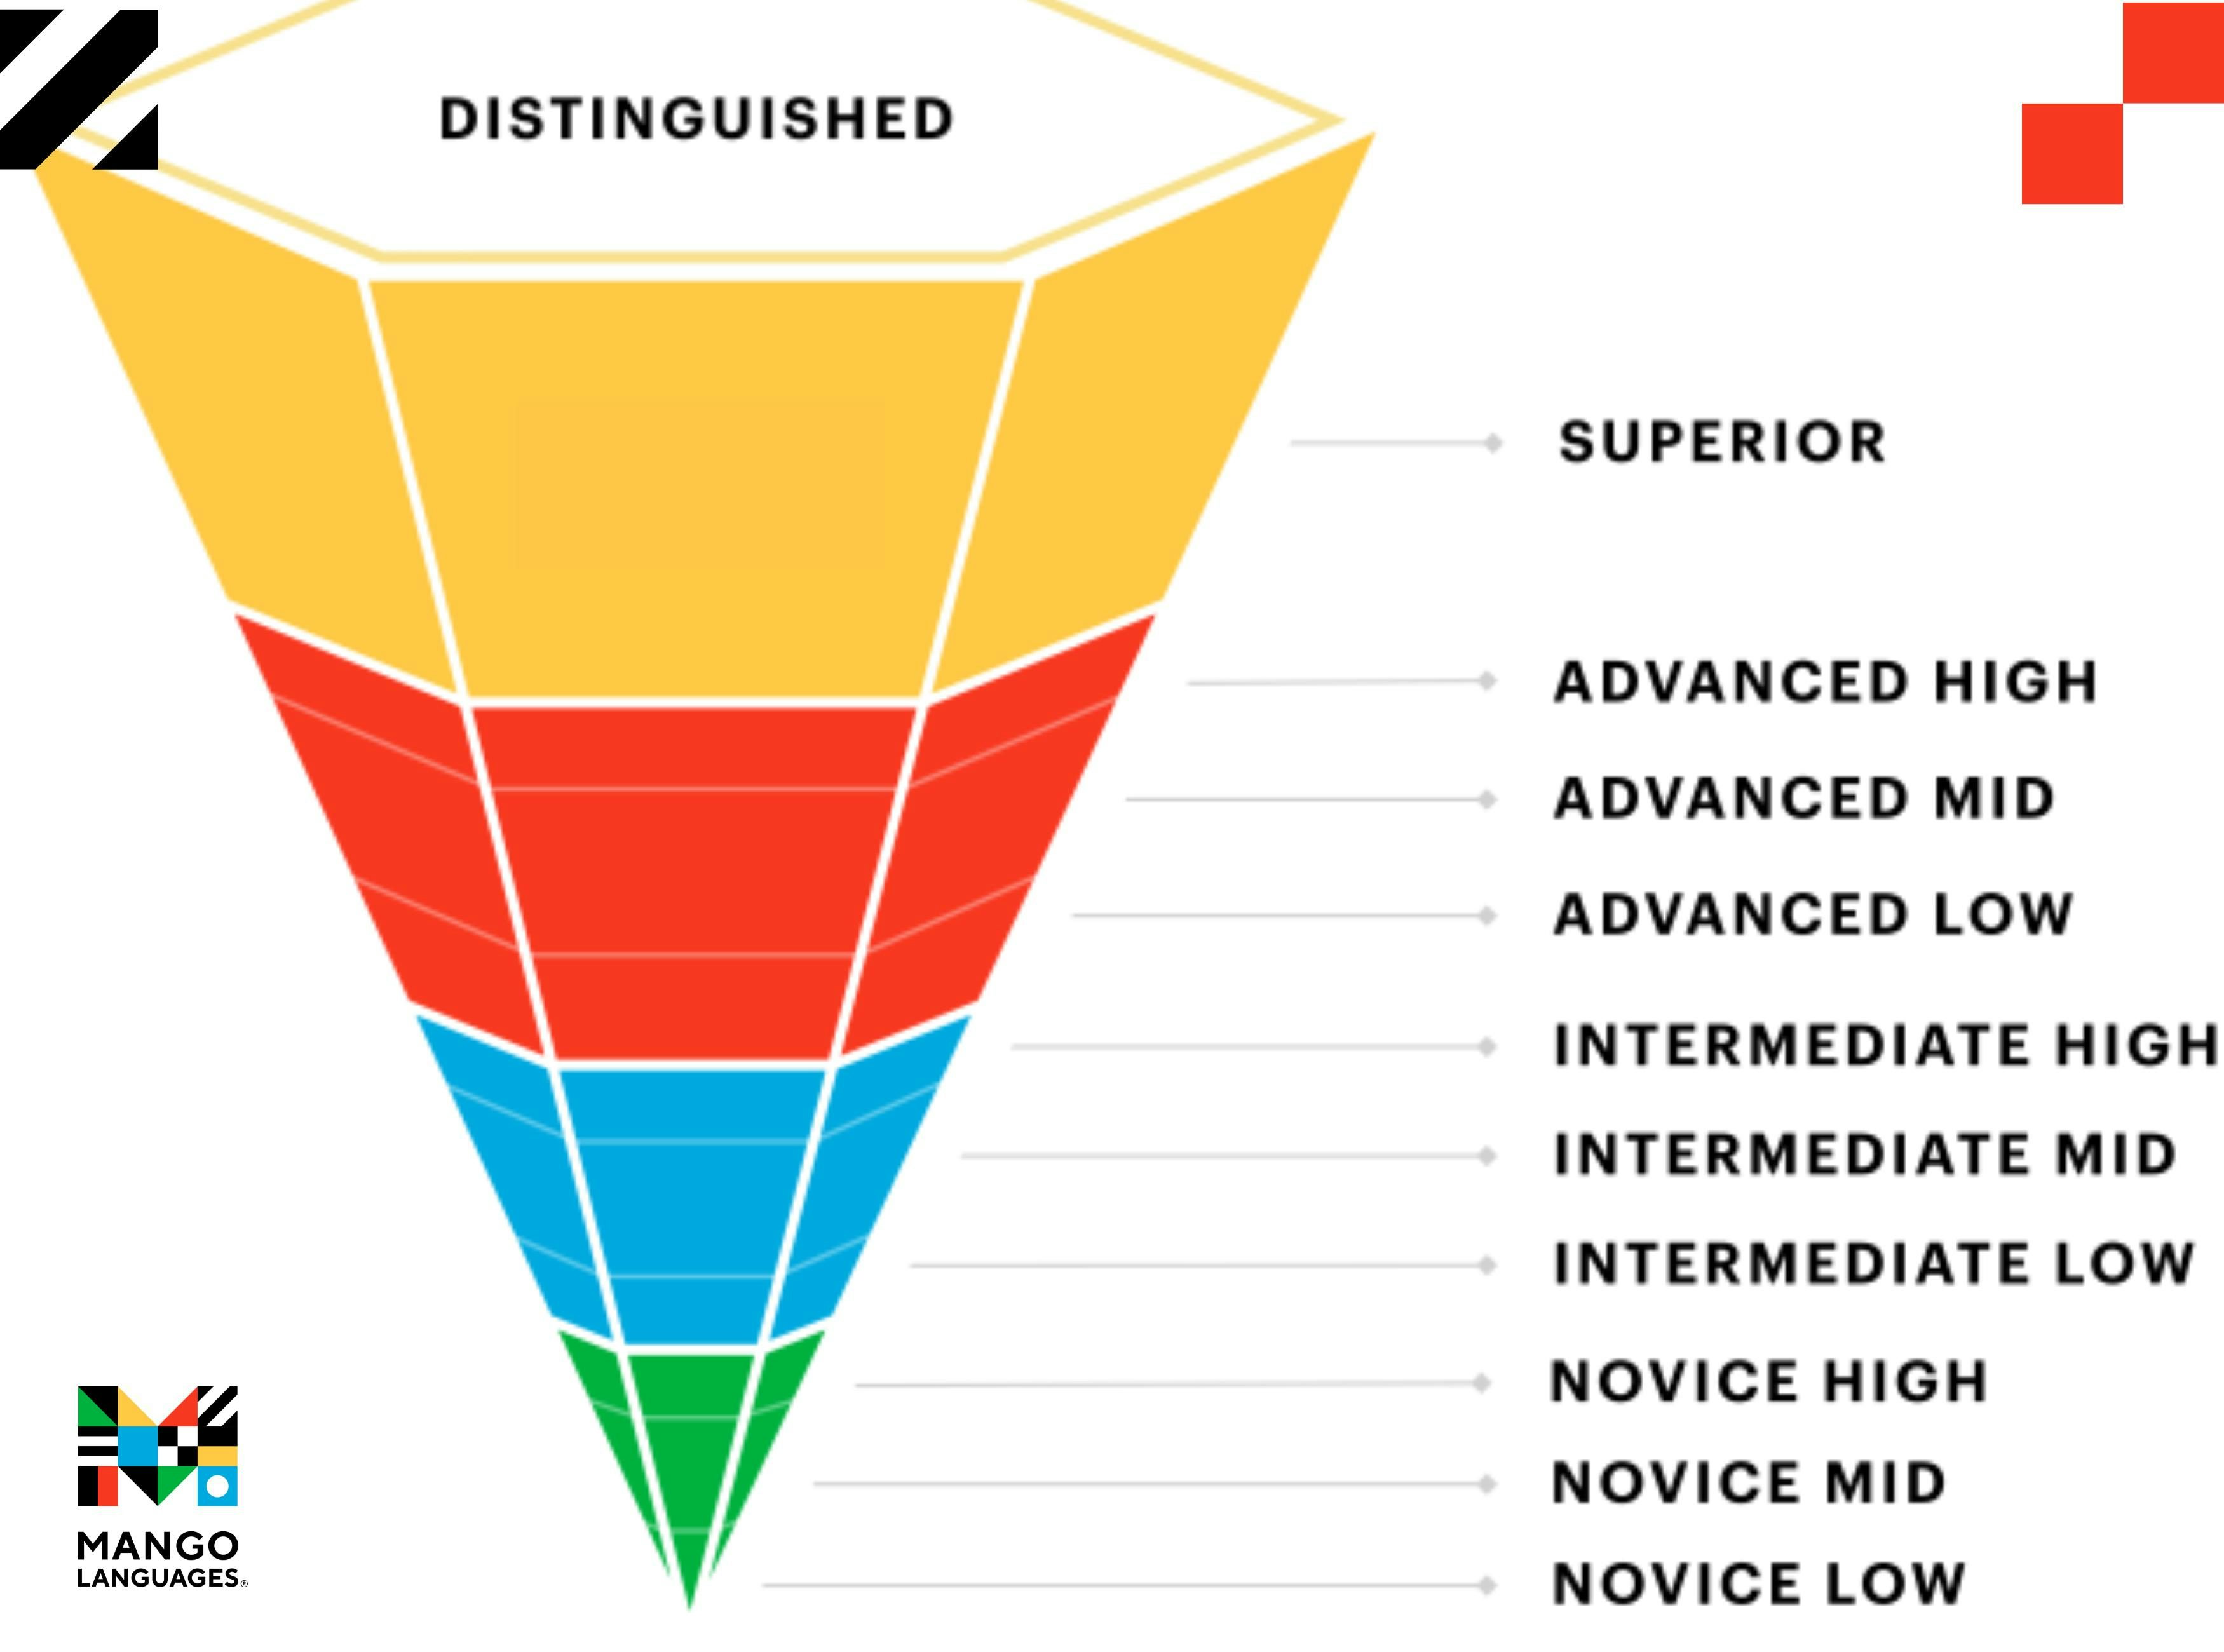 A cone graph showing the different levels of language knowledge according to CEFR: Novice low, novice mid, novice high intermediate low, intermediate mid, intermediate high, advanced low, advanced mid, advanced high, superior